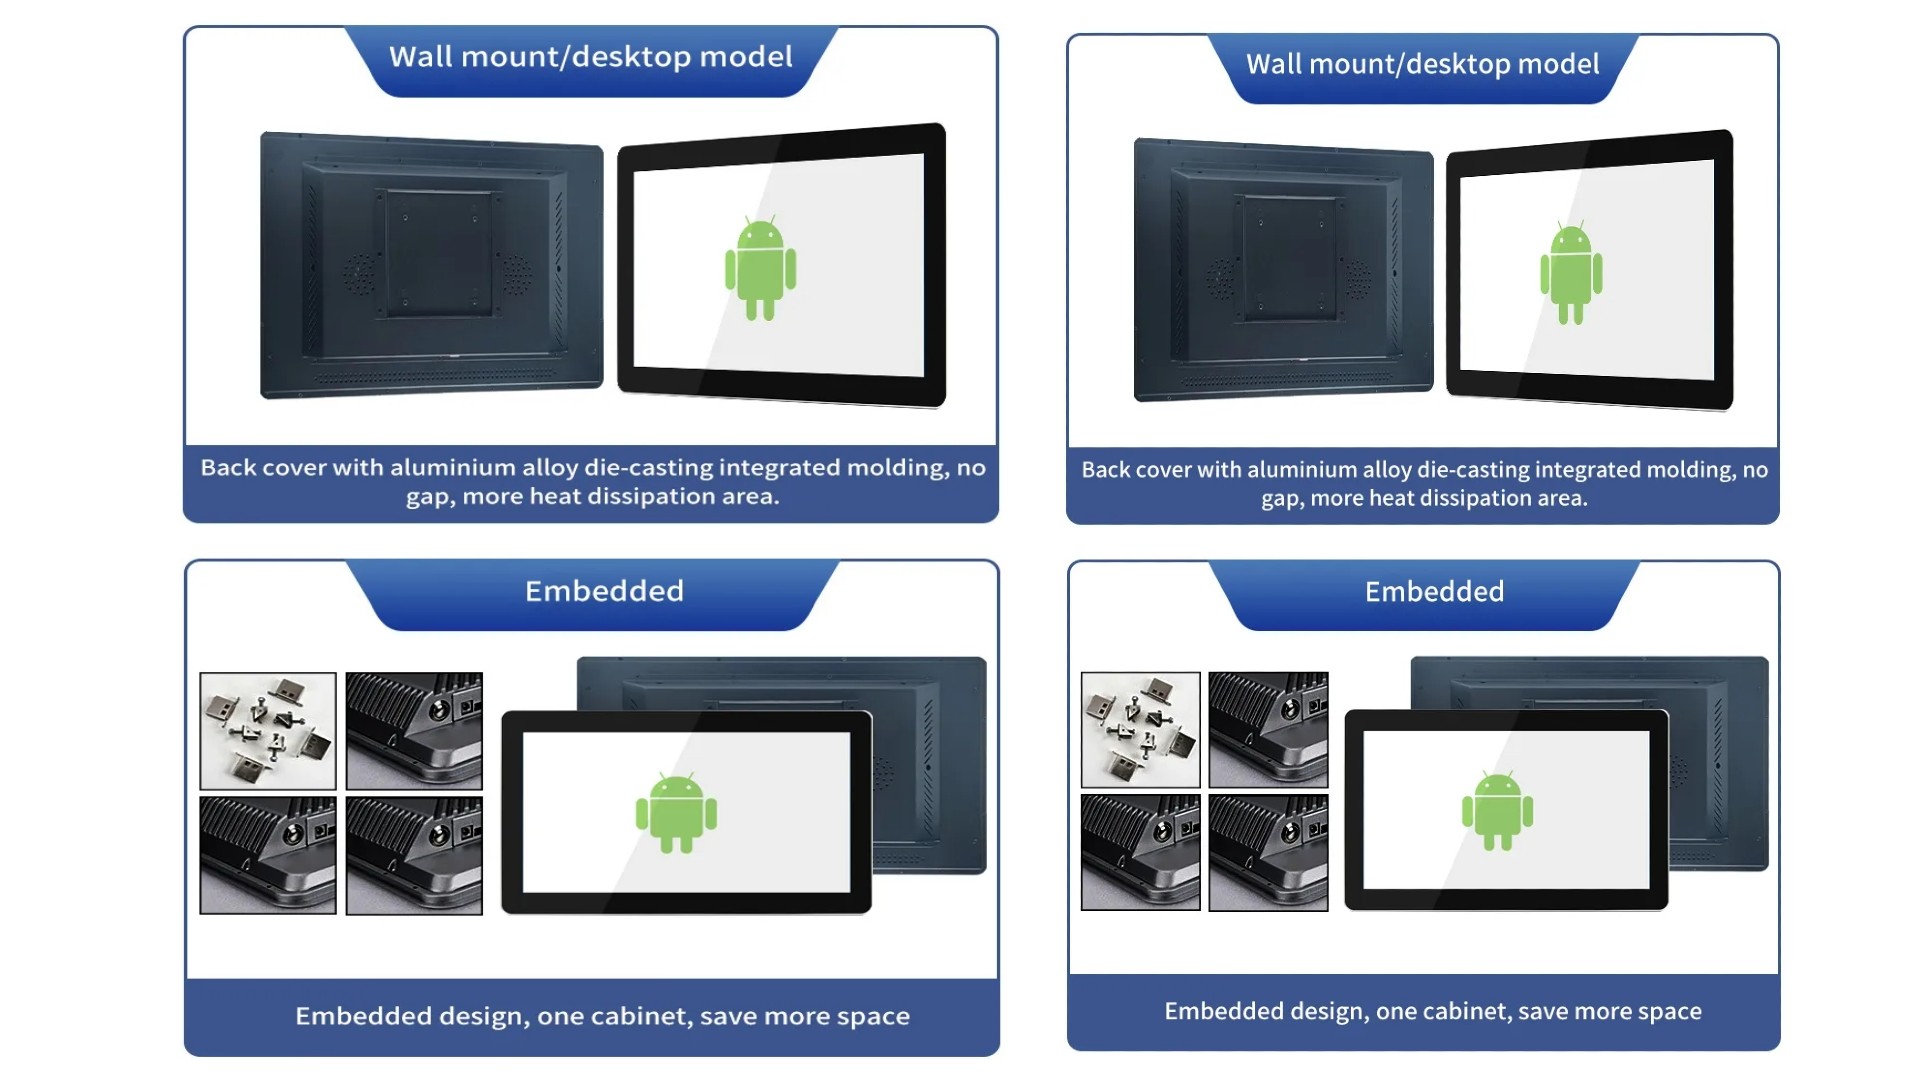 7-Inch Android Touchscreen Display